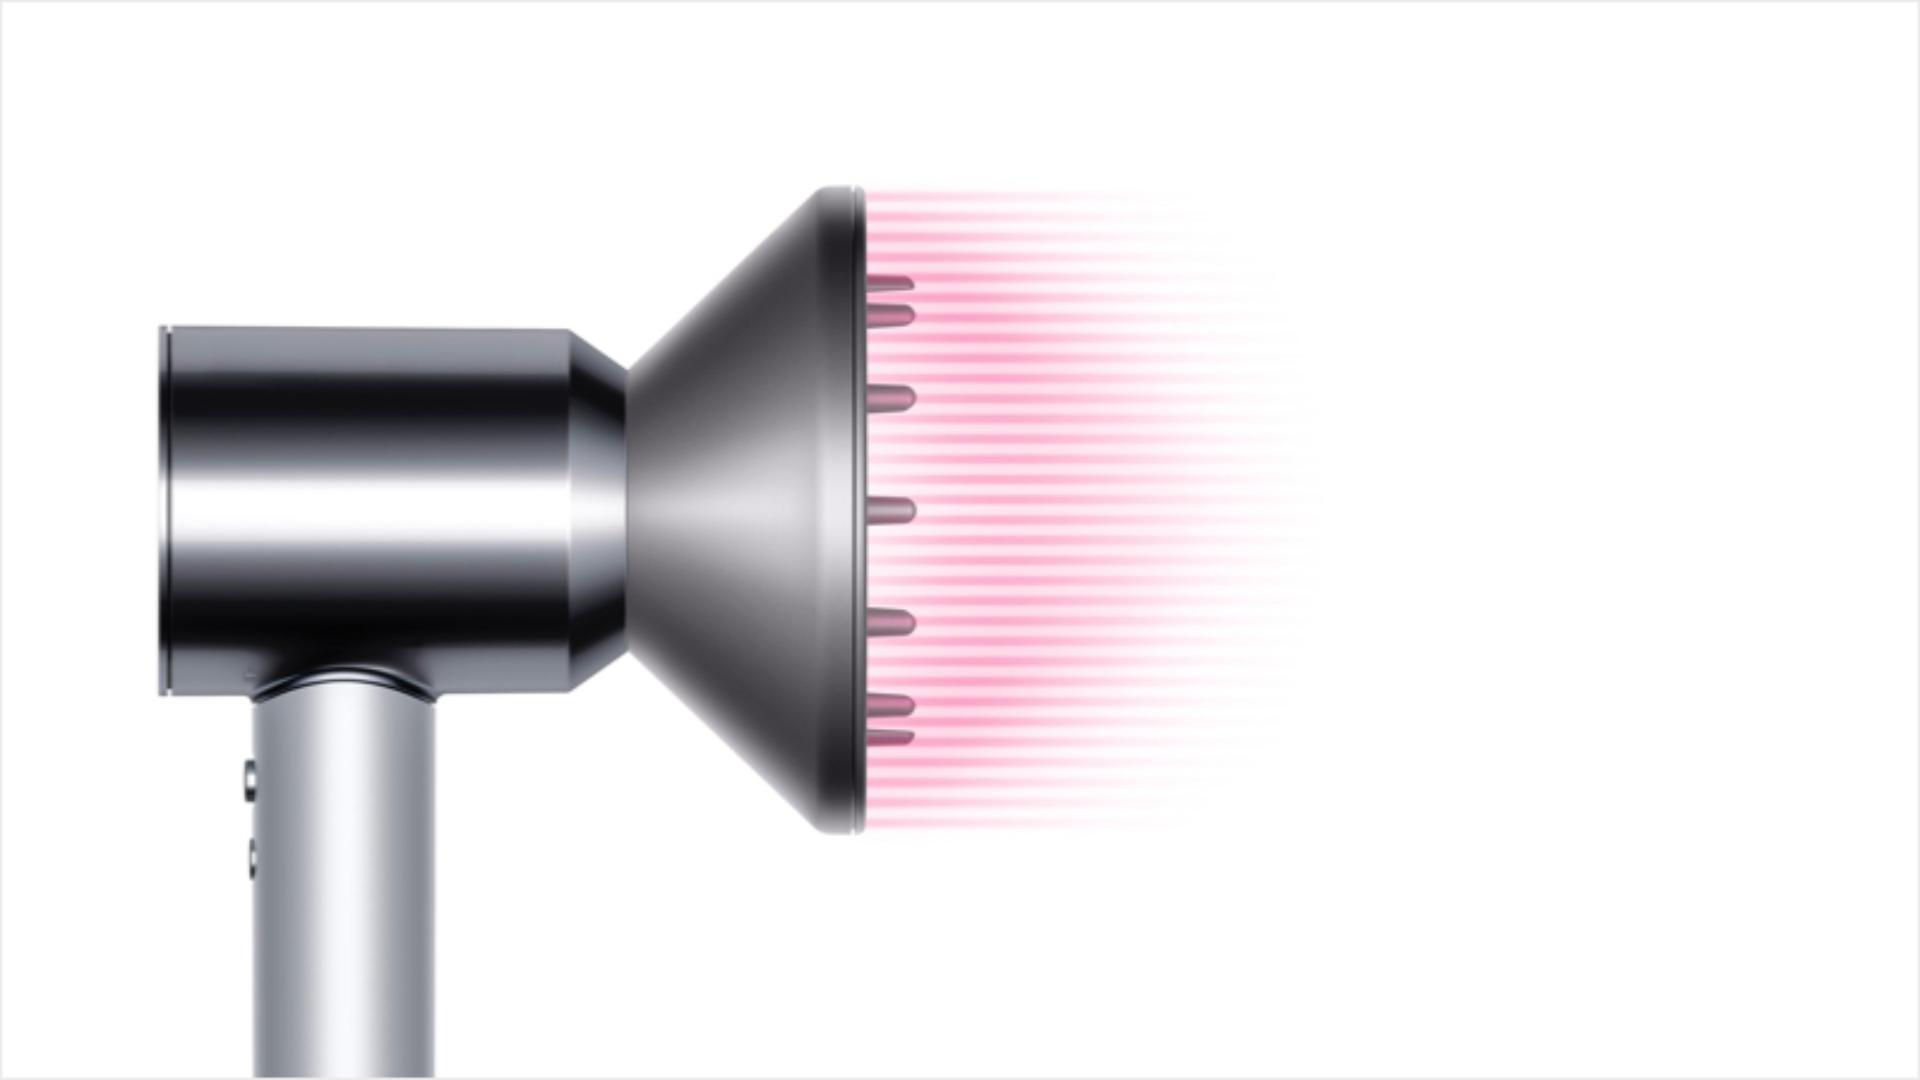 Diffuser attachment for the Dyson Supersonic hair dryer